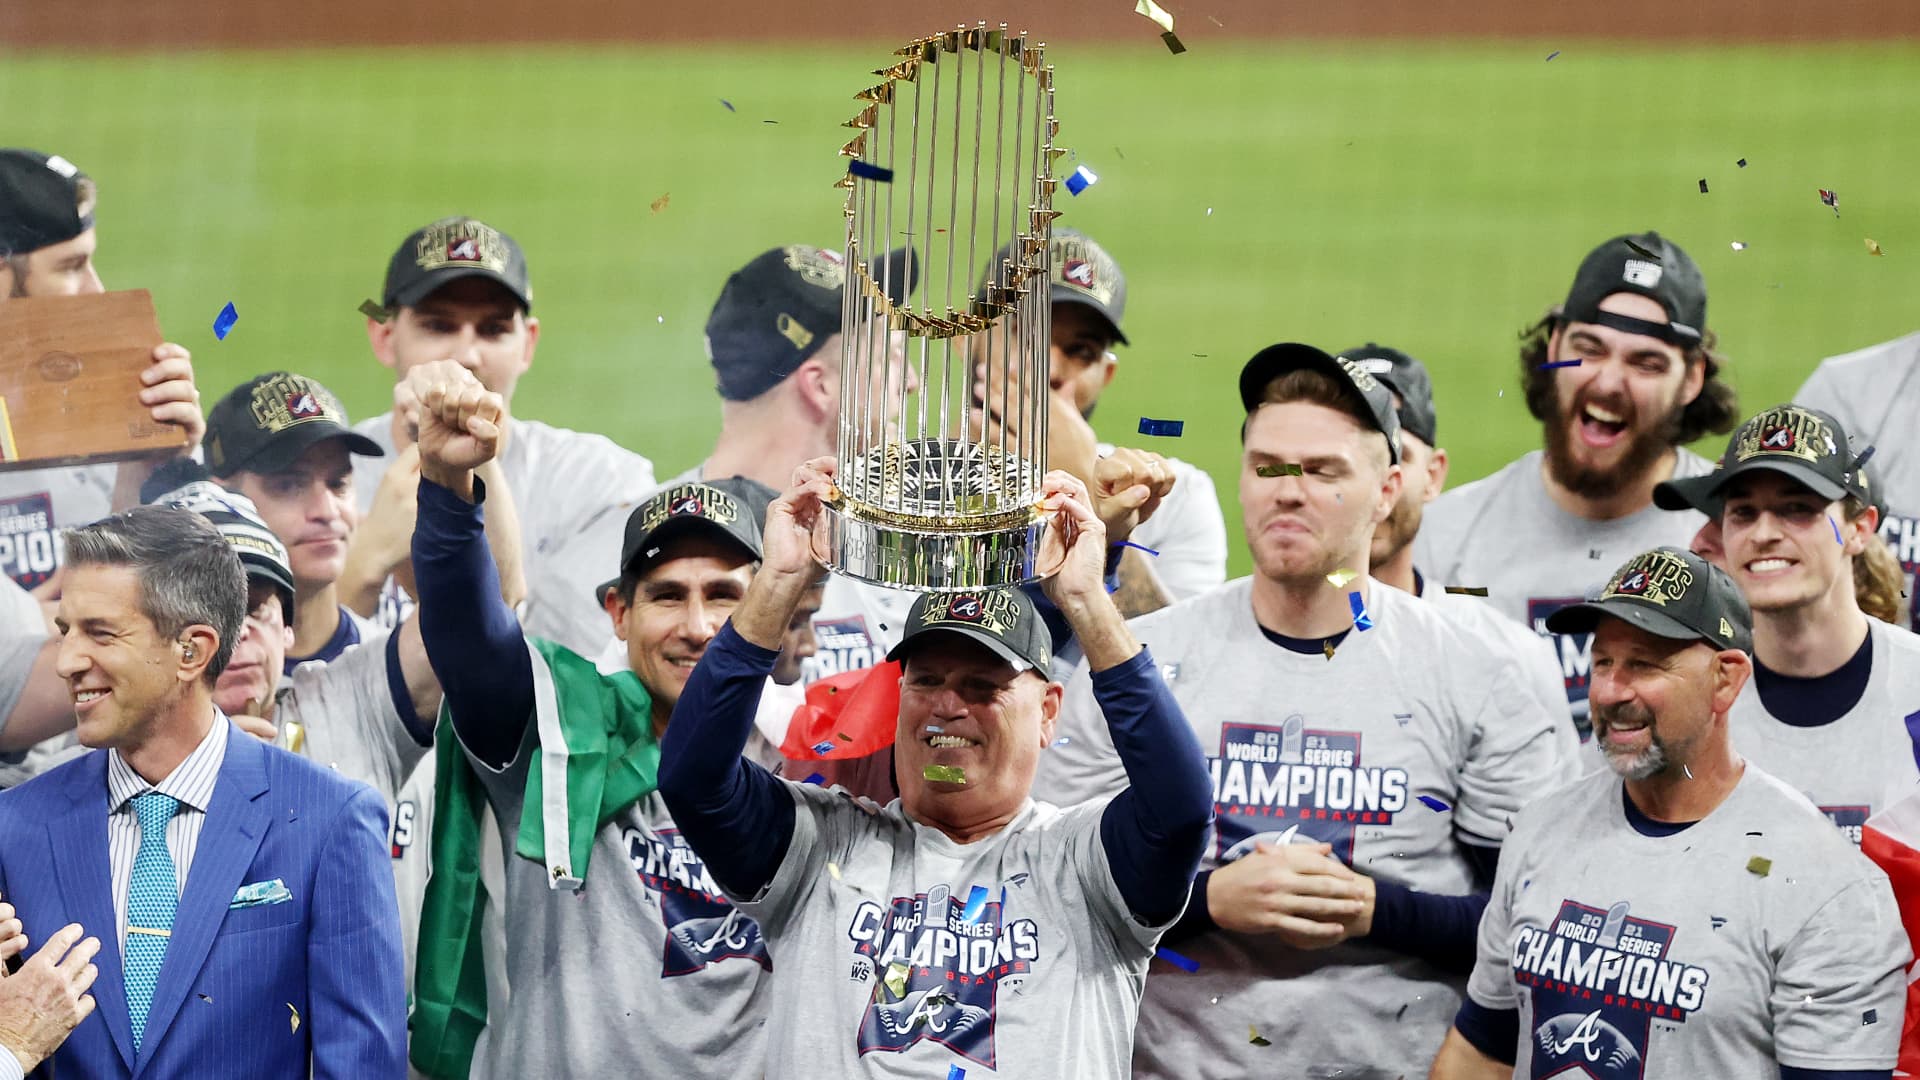 Manager Brian Snitker #43 of the Atlanta Braves hoists the commissioner's trophy following the team's 7-0 victory against the Houston Astros in Game Six to win the 2021 World Series at Minute Maid Park on November 02, 2021 in Houston, Texas.